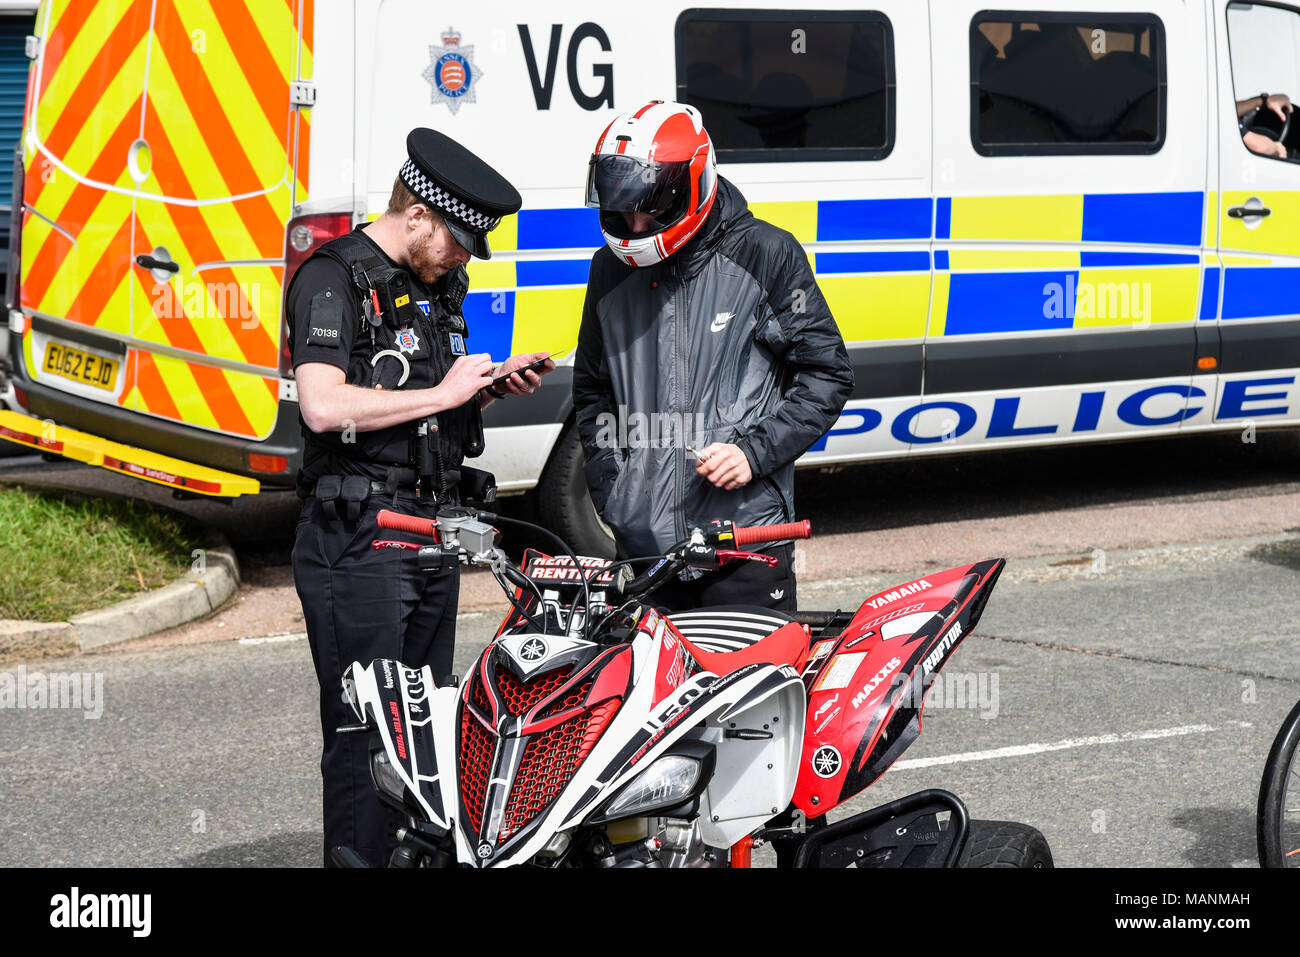 Quad bike rider pulled over by police for motoring offence. Police van. Policeman taking notes. Southend Shakedown motorbike unofficial event. Policed Stock Photo